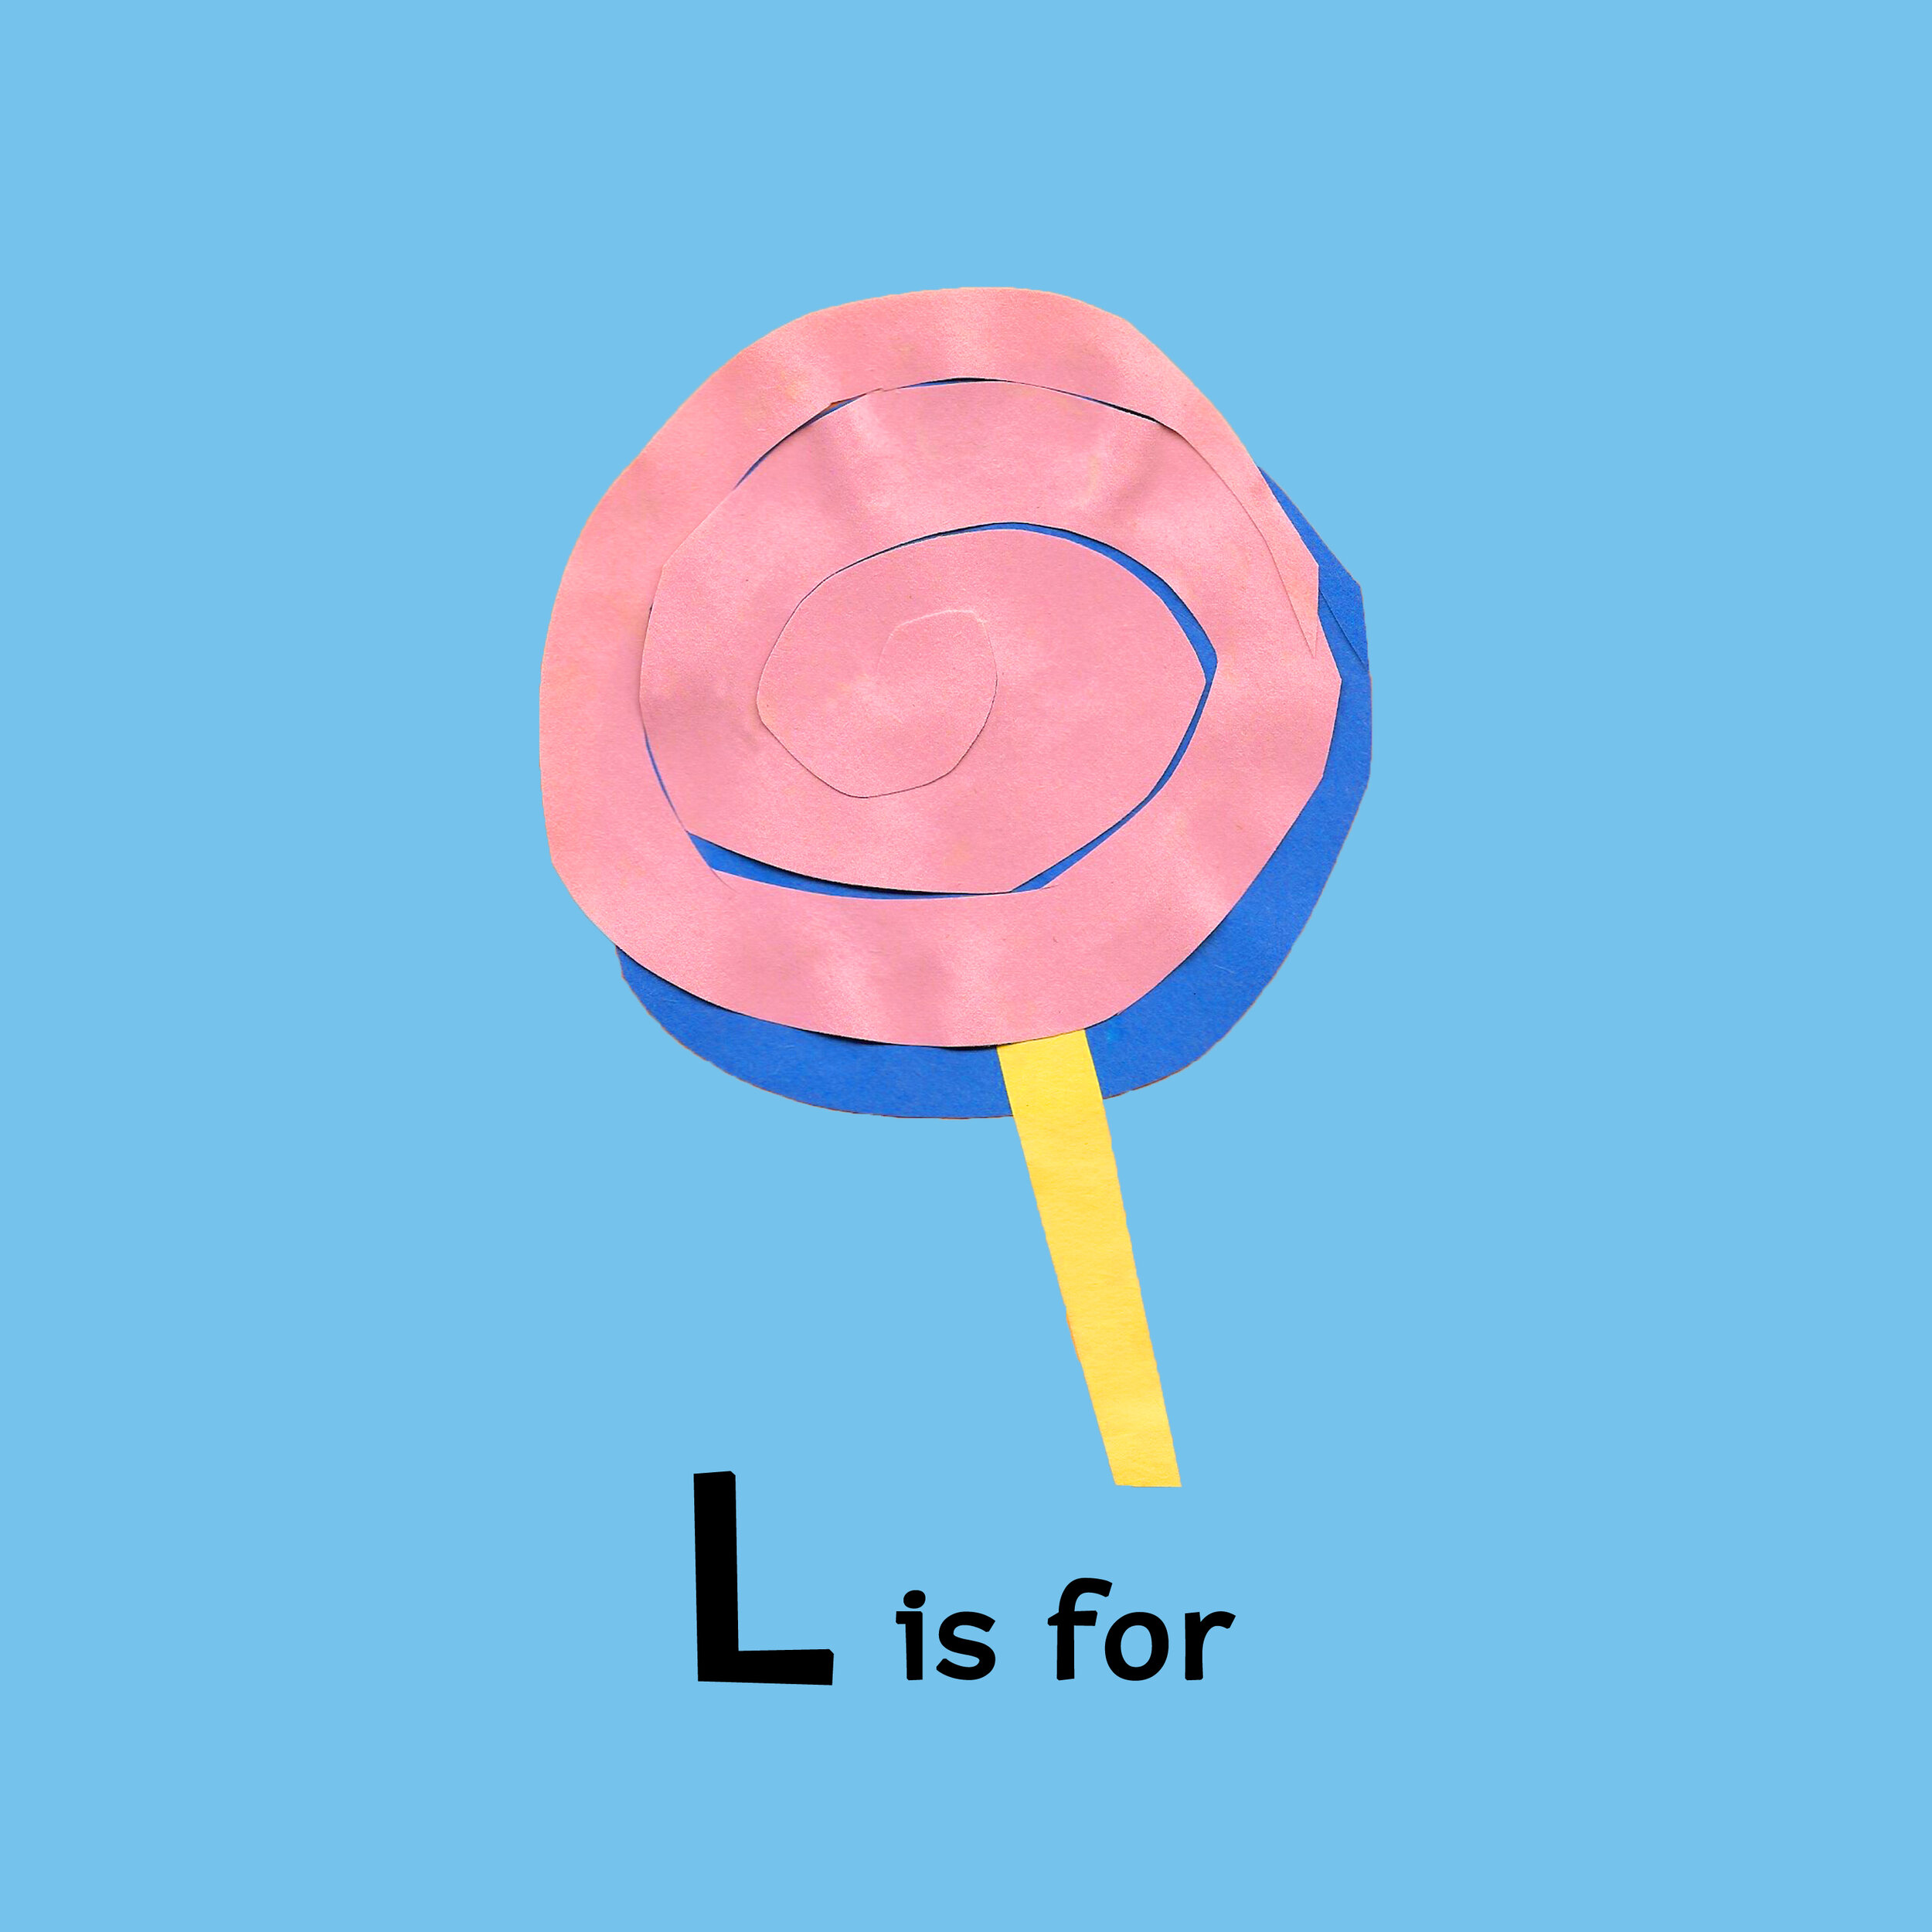 L is for.jpg